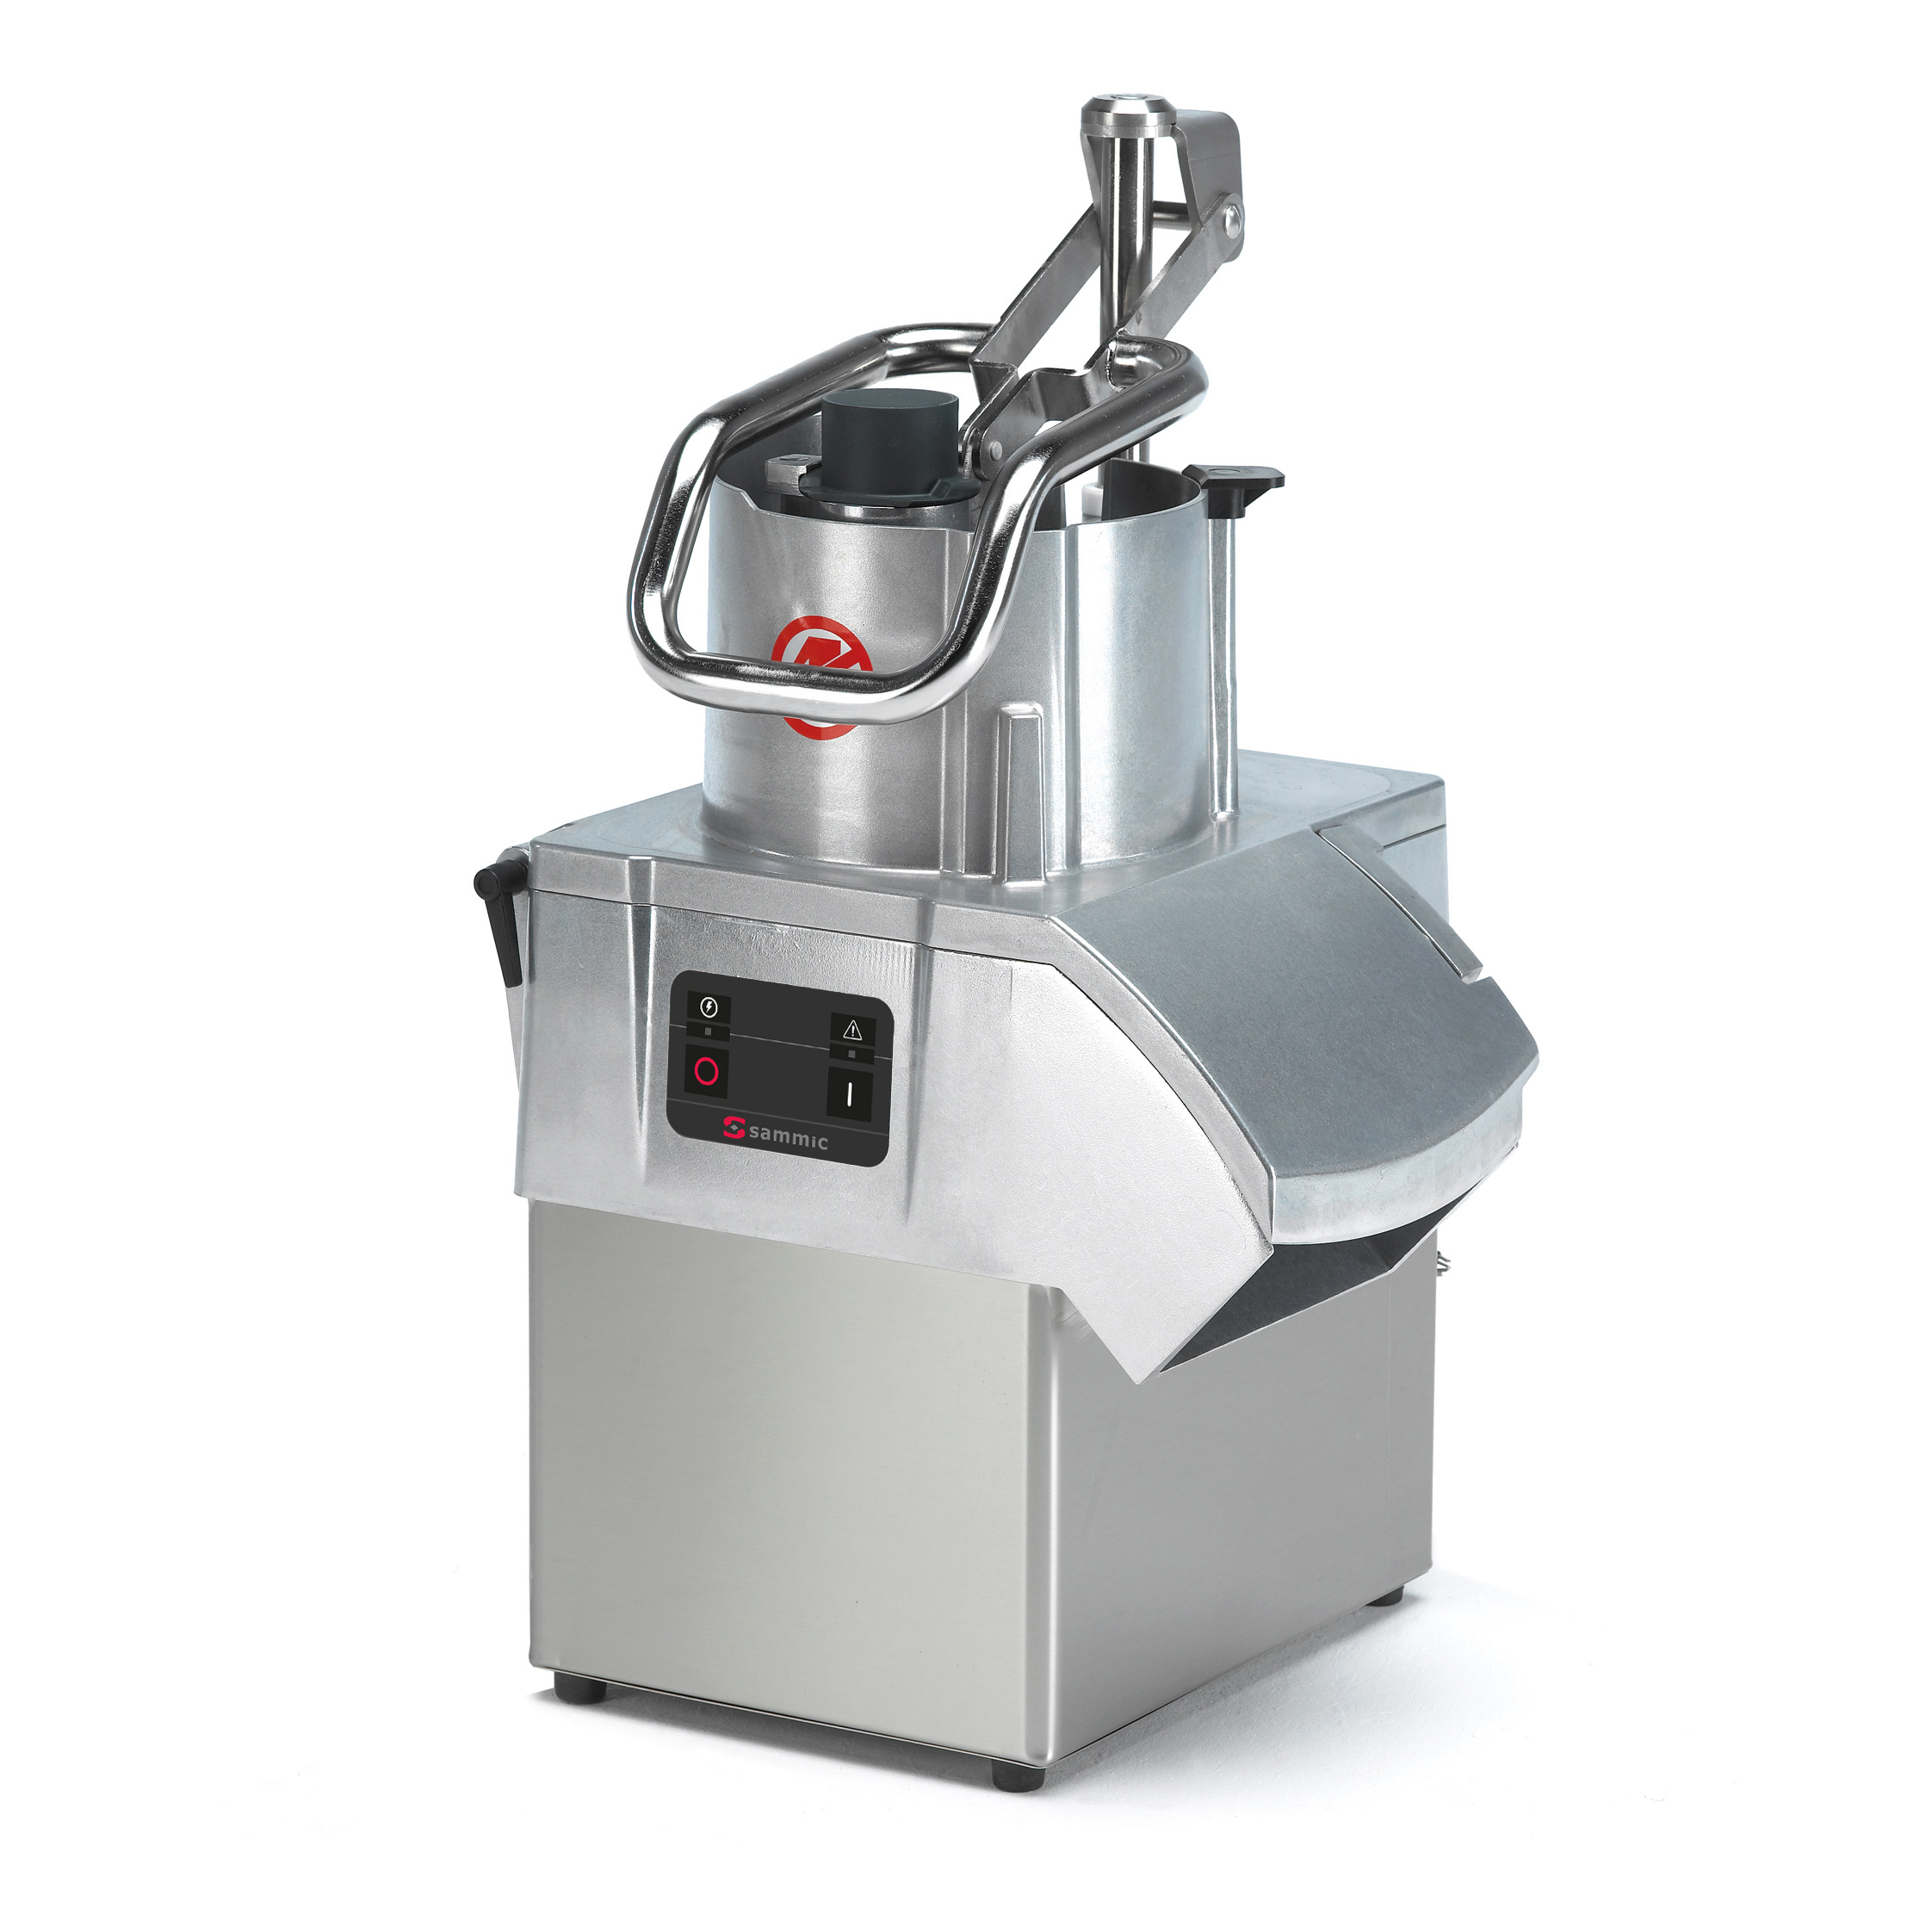 Univex Corporation - Manufacturer of commercial quality mixers, slicers,  dough processors and prep equipment